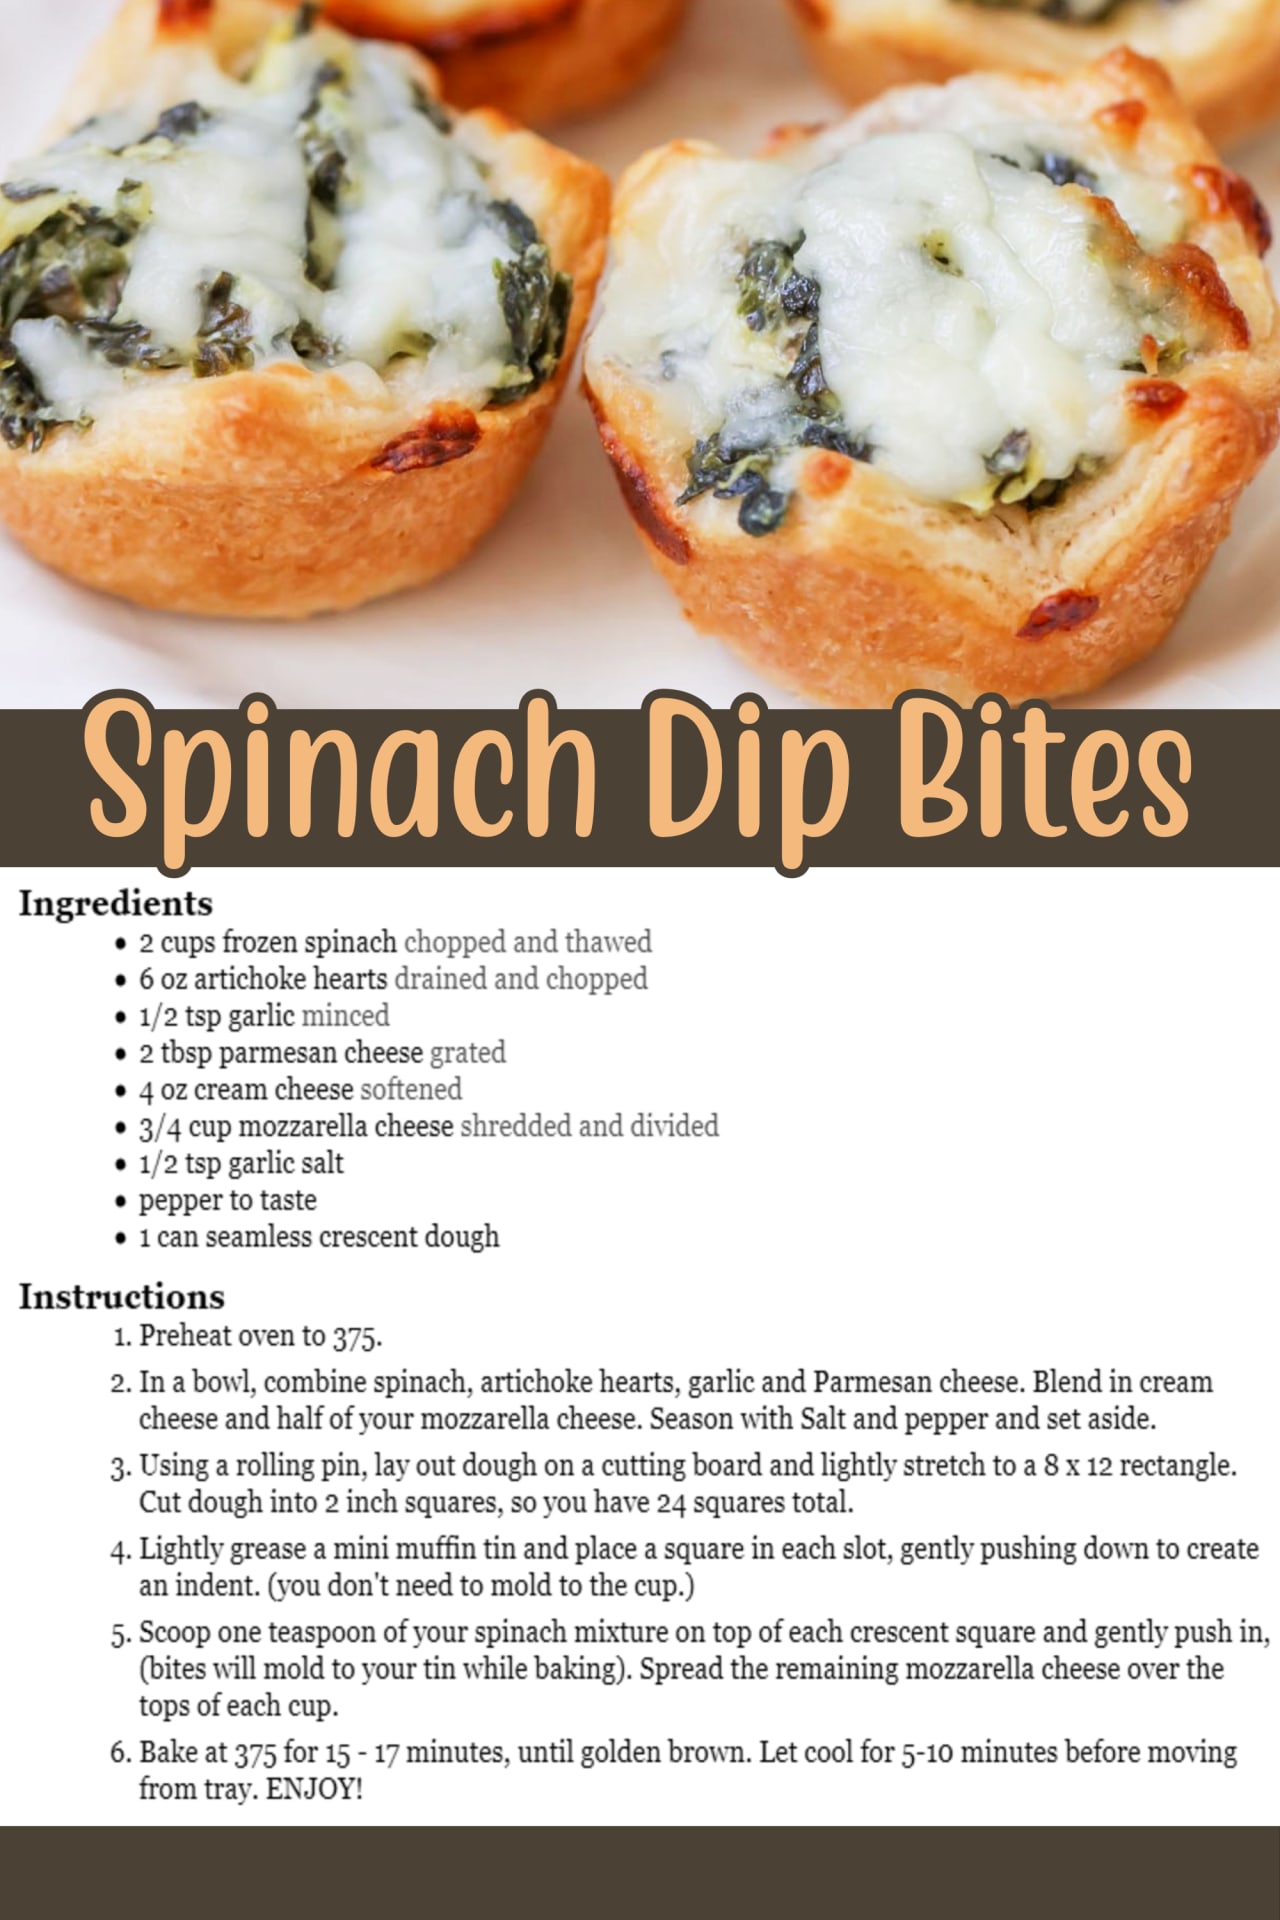 Easy party appetizers for a crowd - simple appetizer ideas for pleasing a crowd at family gatherings, entertaining, New Years Eve or holiday Christmas party - definite simple crowd-pleasers!  Quick and easy Make ahead Spinach dip appetizer recipe ideas and more party food ideas for a crowd